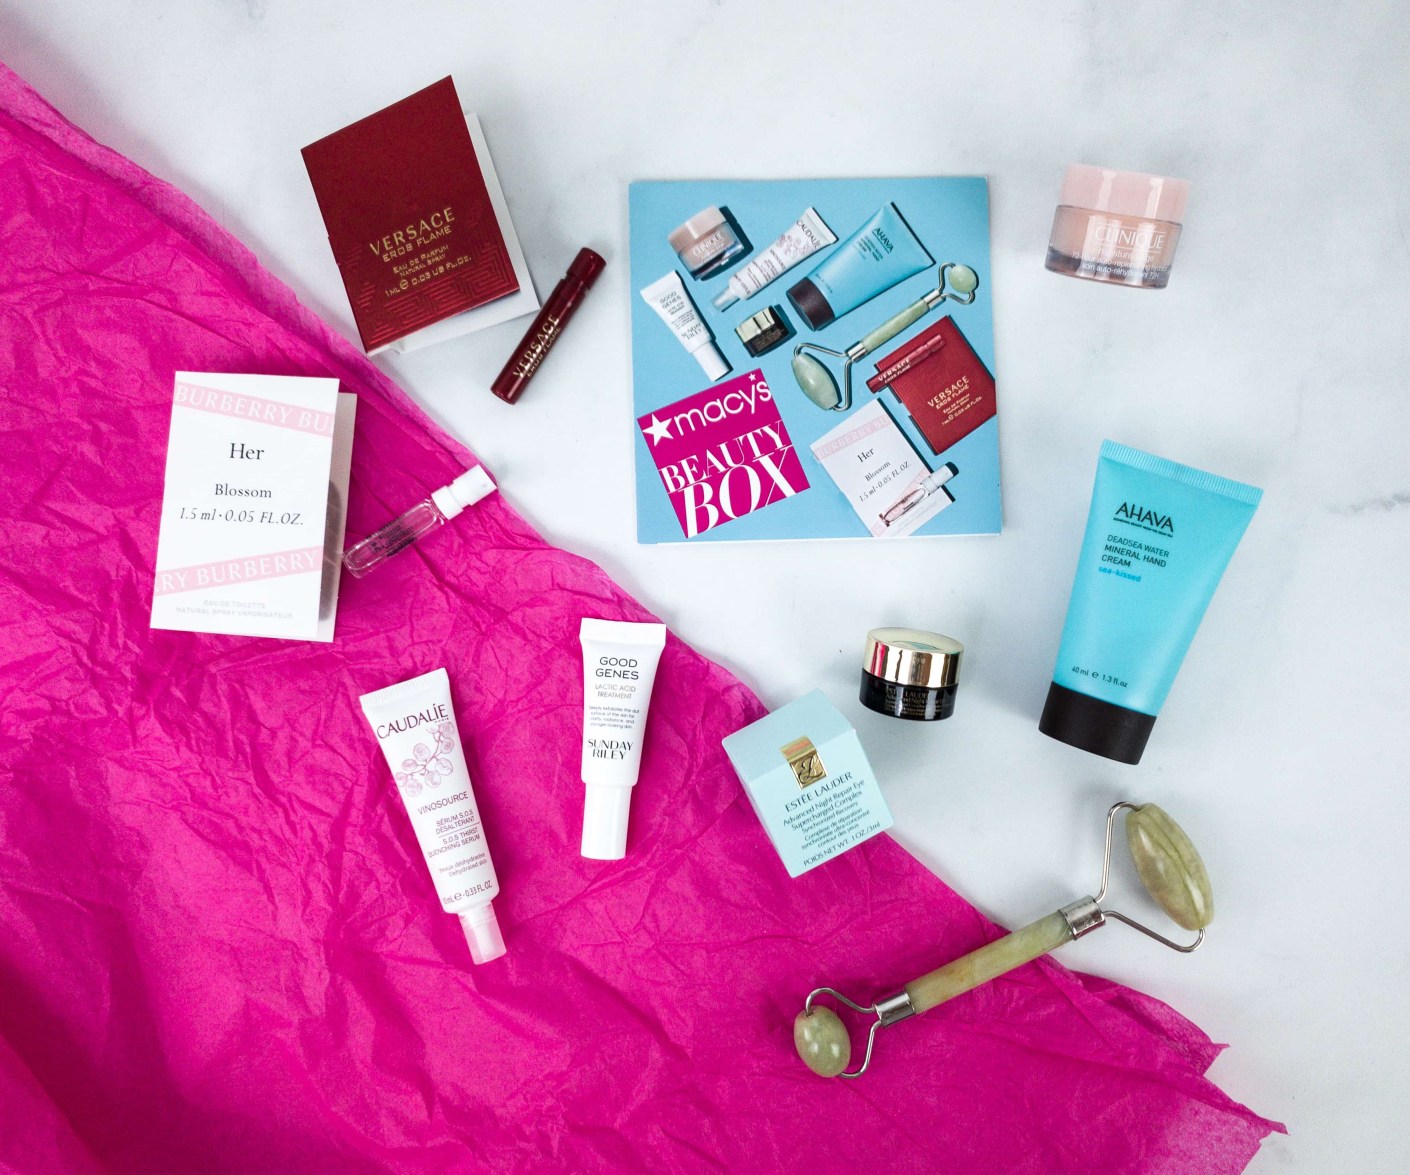 Macy's Beauty Box Reviews: Get All The Details At Hello Subscription!